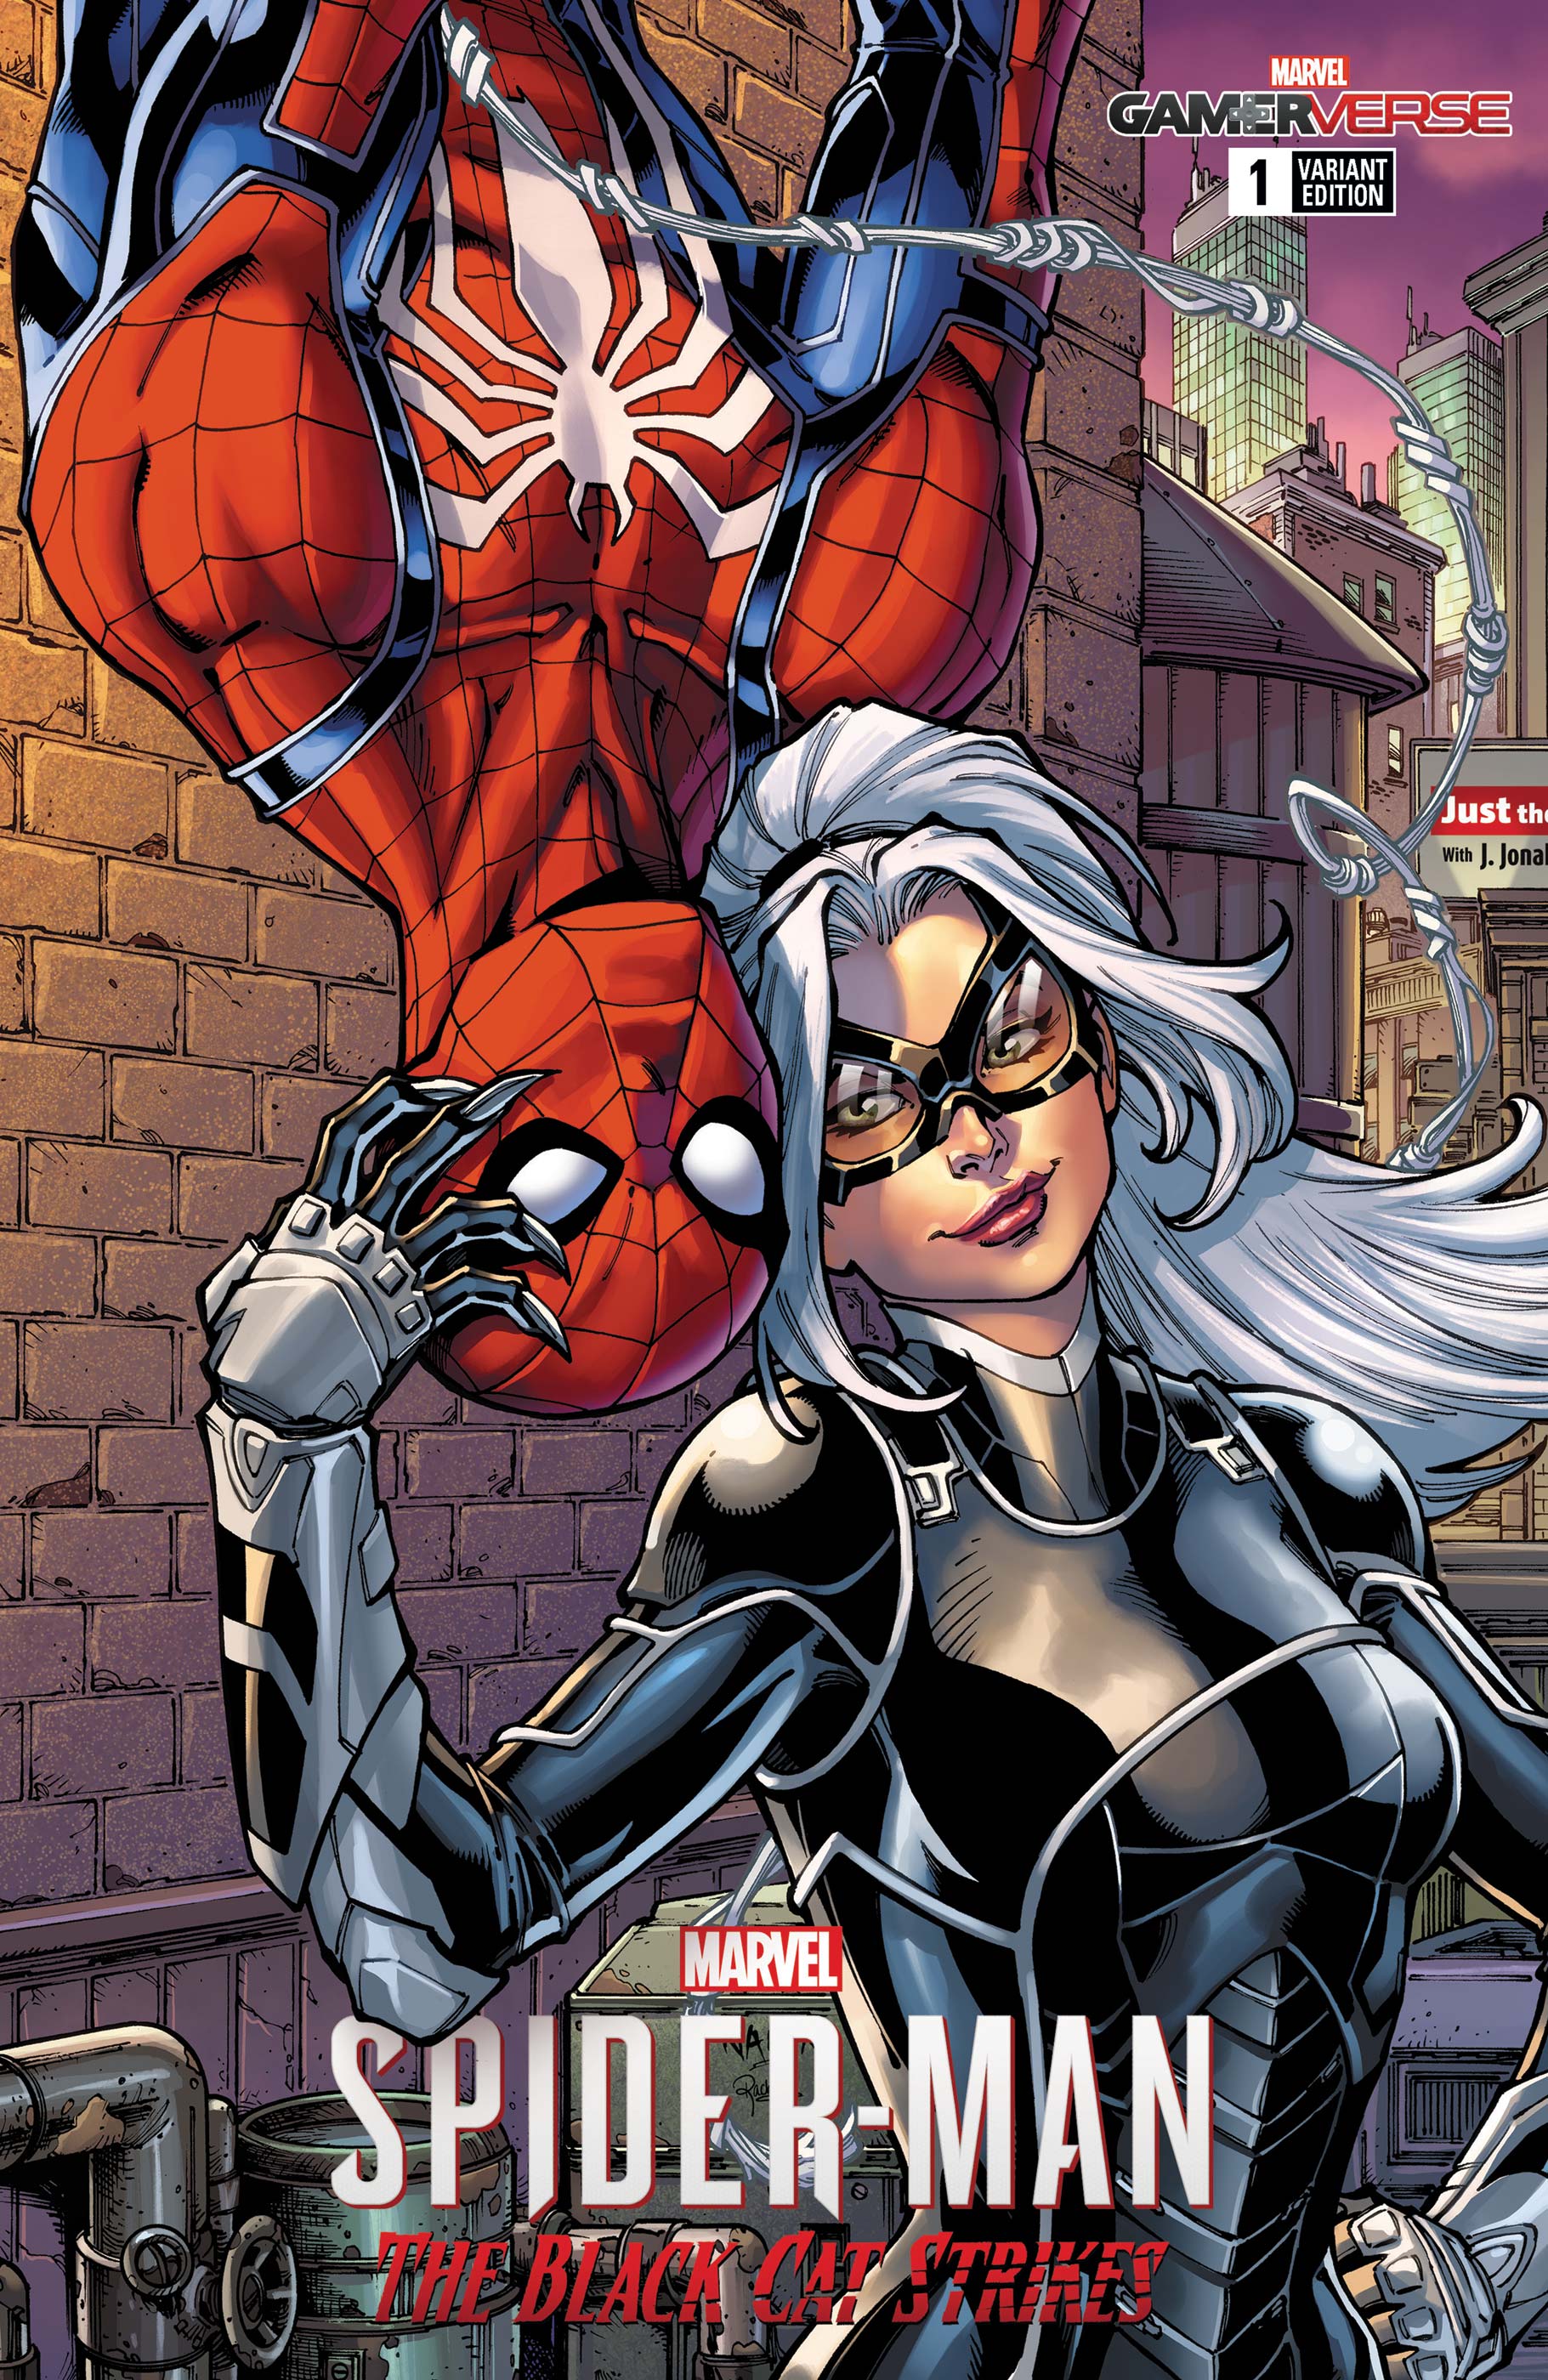 Spiderman and the black cat comic